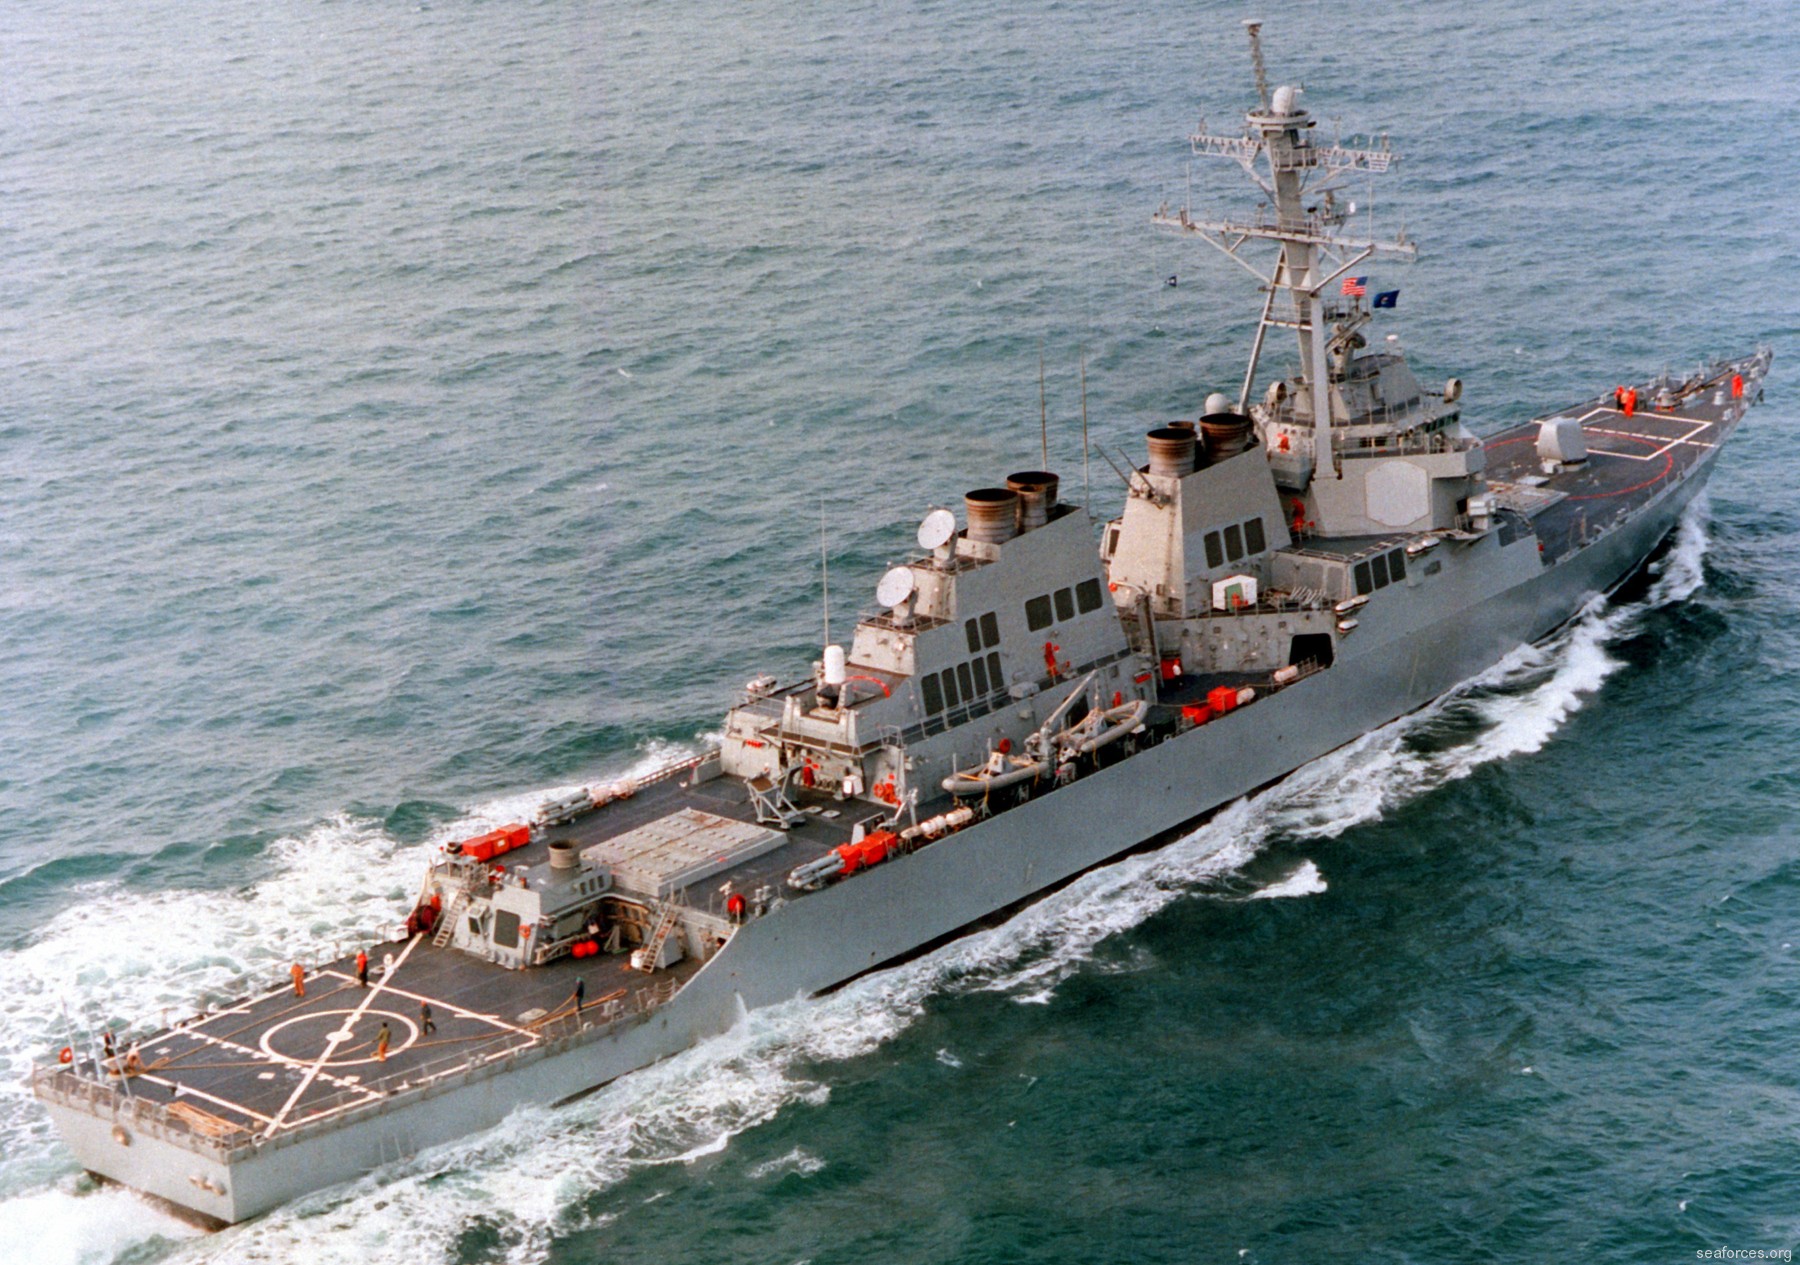 ddg-60 uss paul hamilton guided missile destroyer us navy 52 sea trials